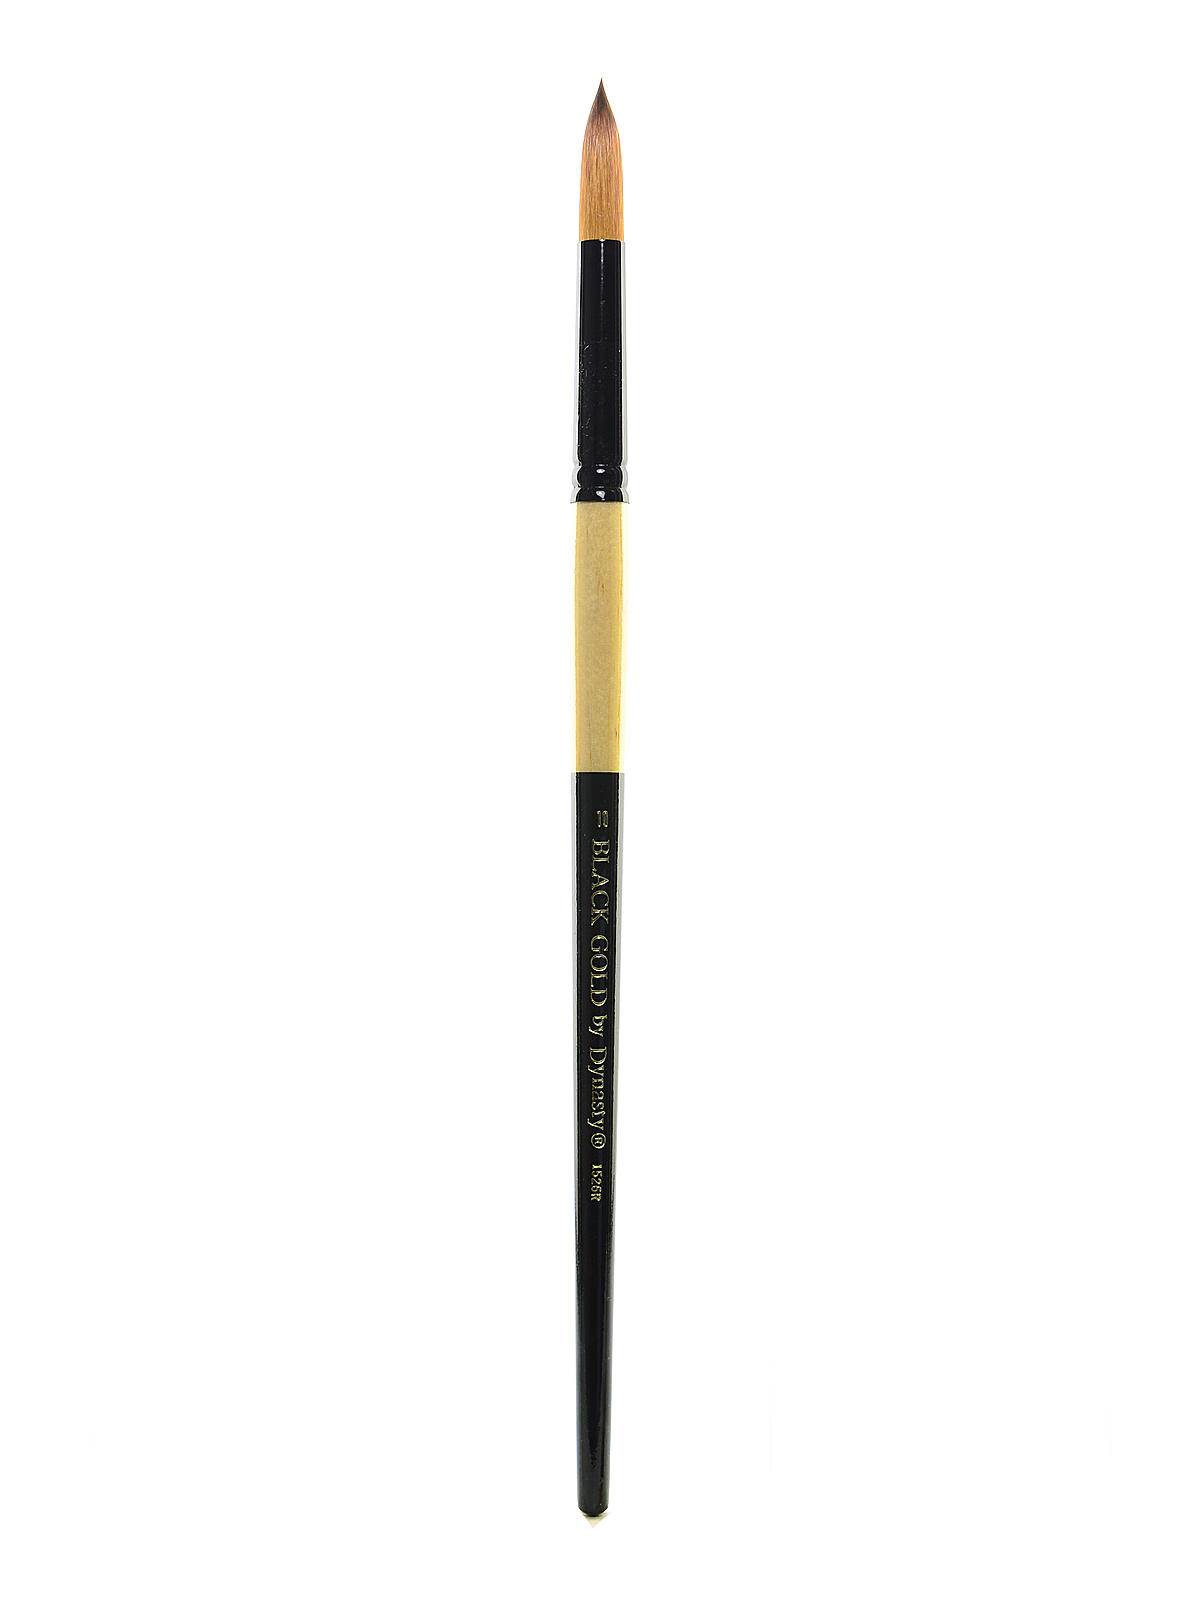 Black Gold Series Long Handled Synthetic Brushes 10 Round 1526r